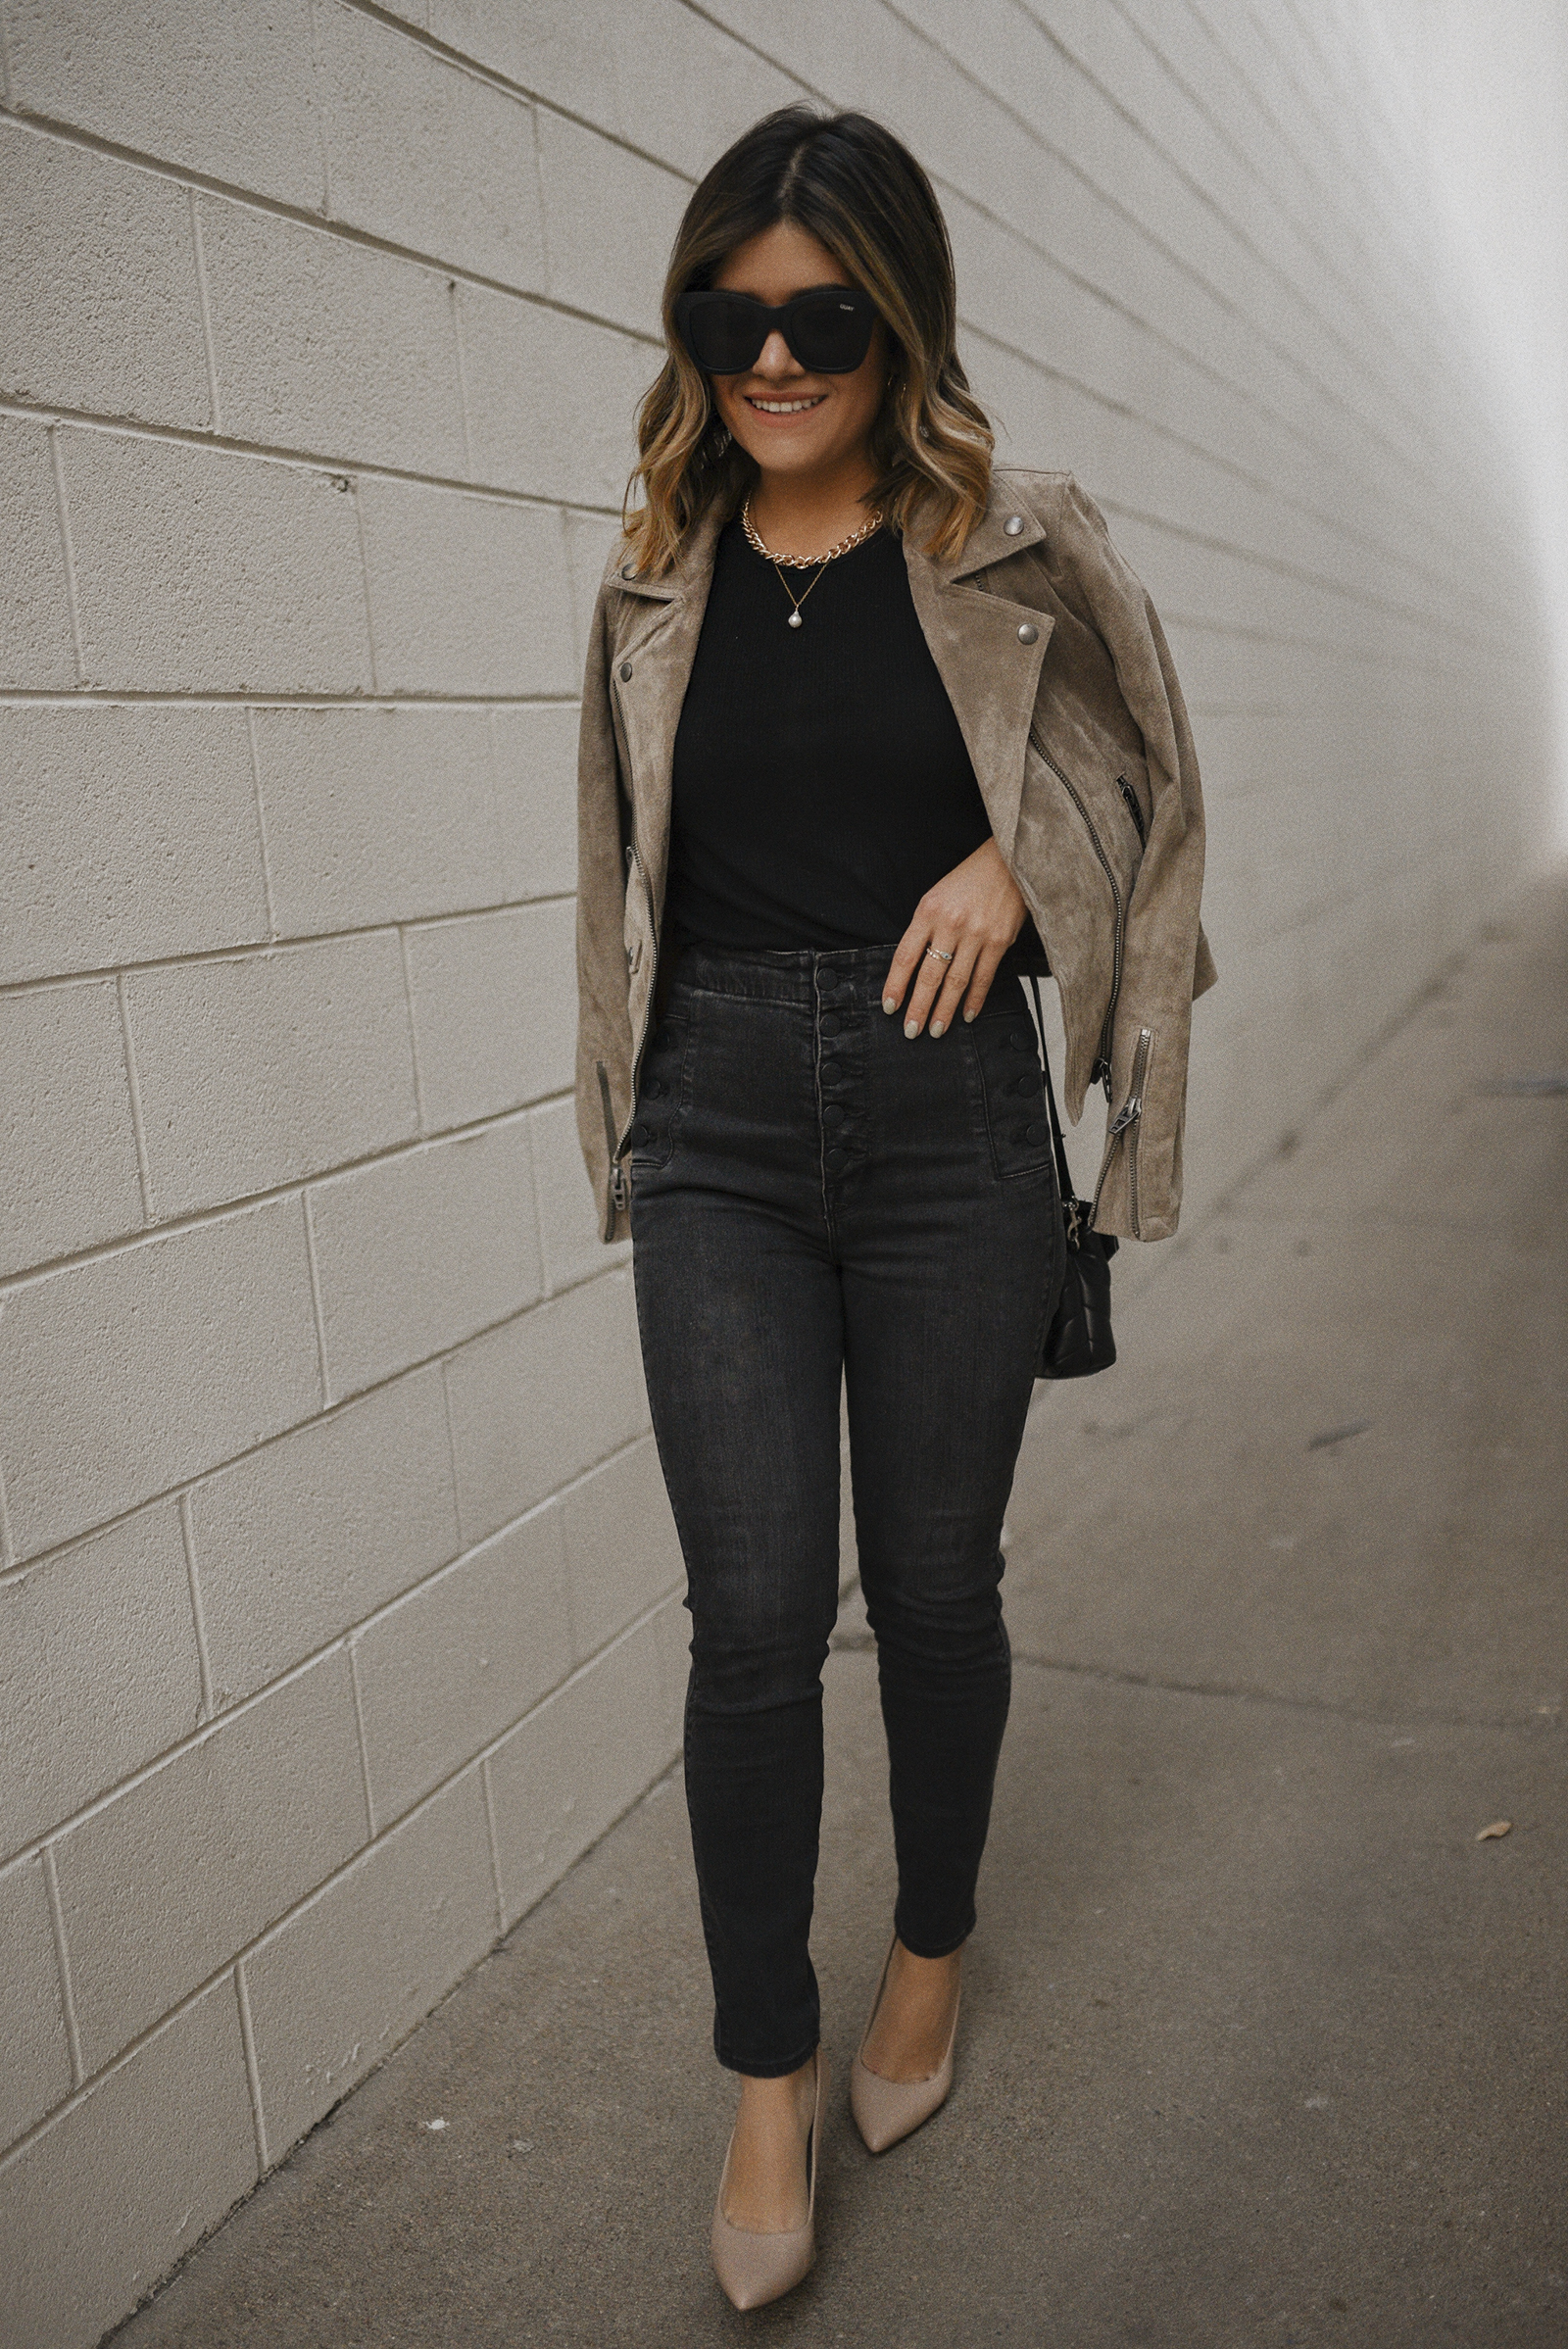 Carolina Hellal of Chic Talk wearing a fall outfit featuring  BLANKNYC jacket, Michael Stars black tank top, JBrand skinny jeans and QUAY sunglasses. 